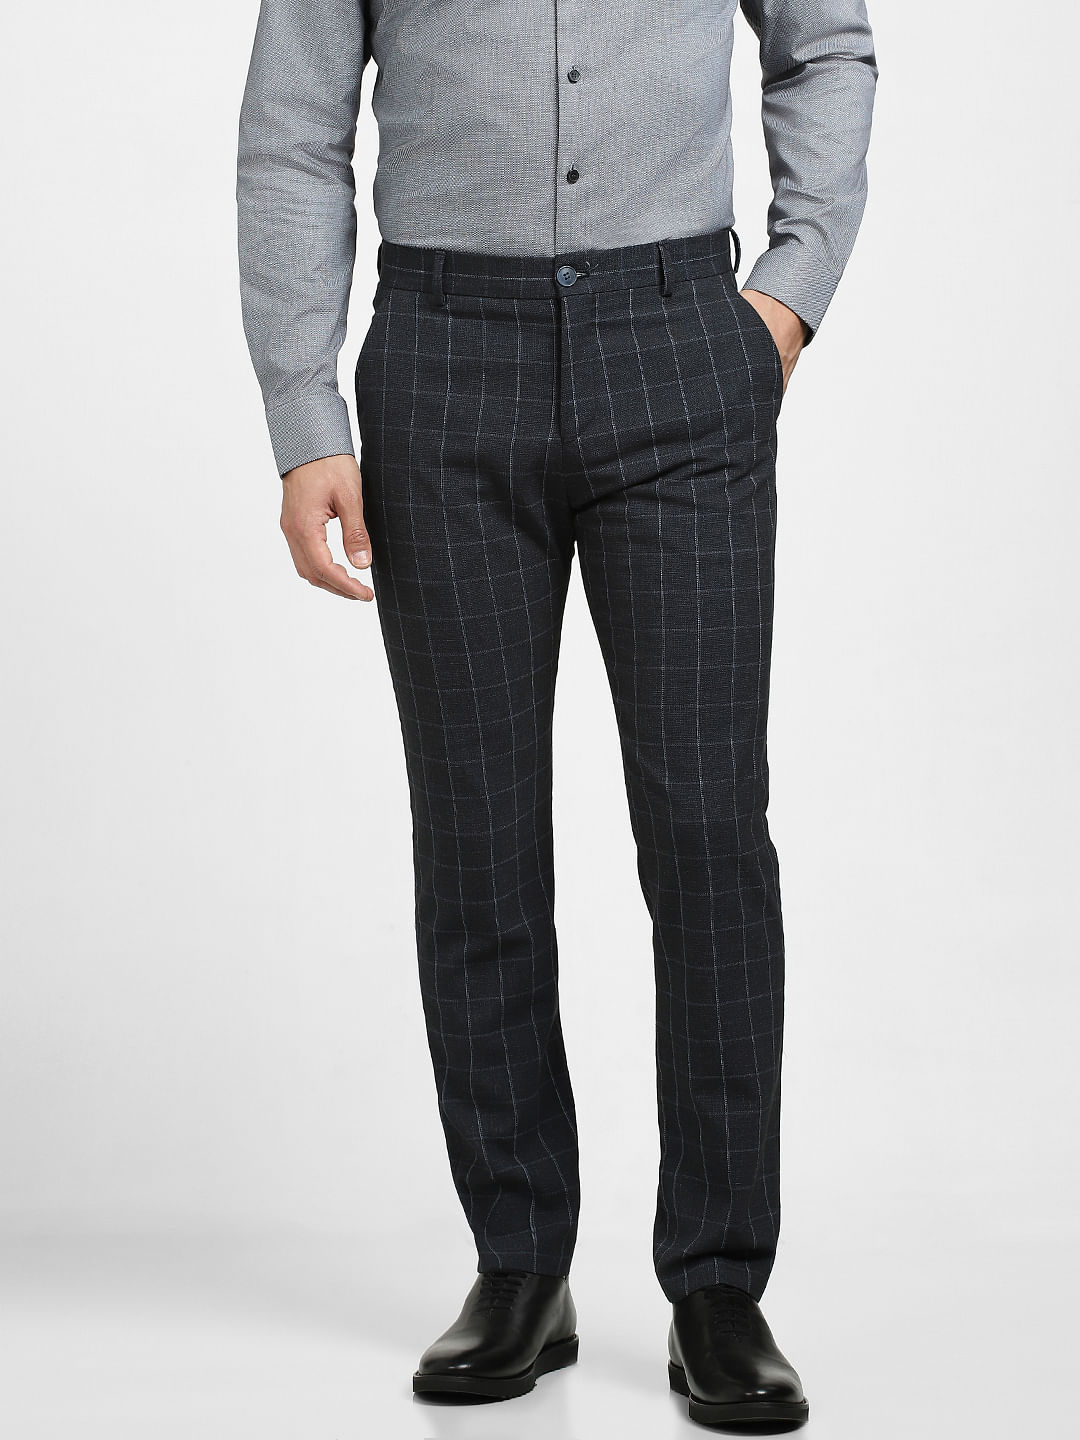 TitleNine Sky Blue Checked Trouser for men/ Casual Check Pants/Slim Fit  Check pants/Cotton check